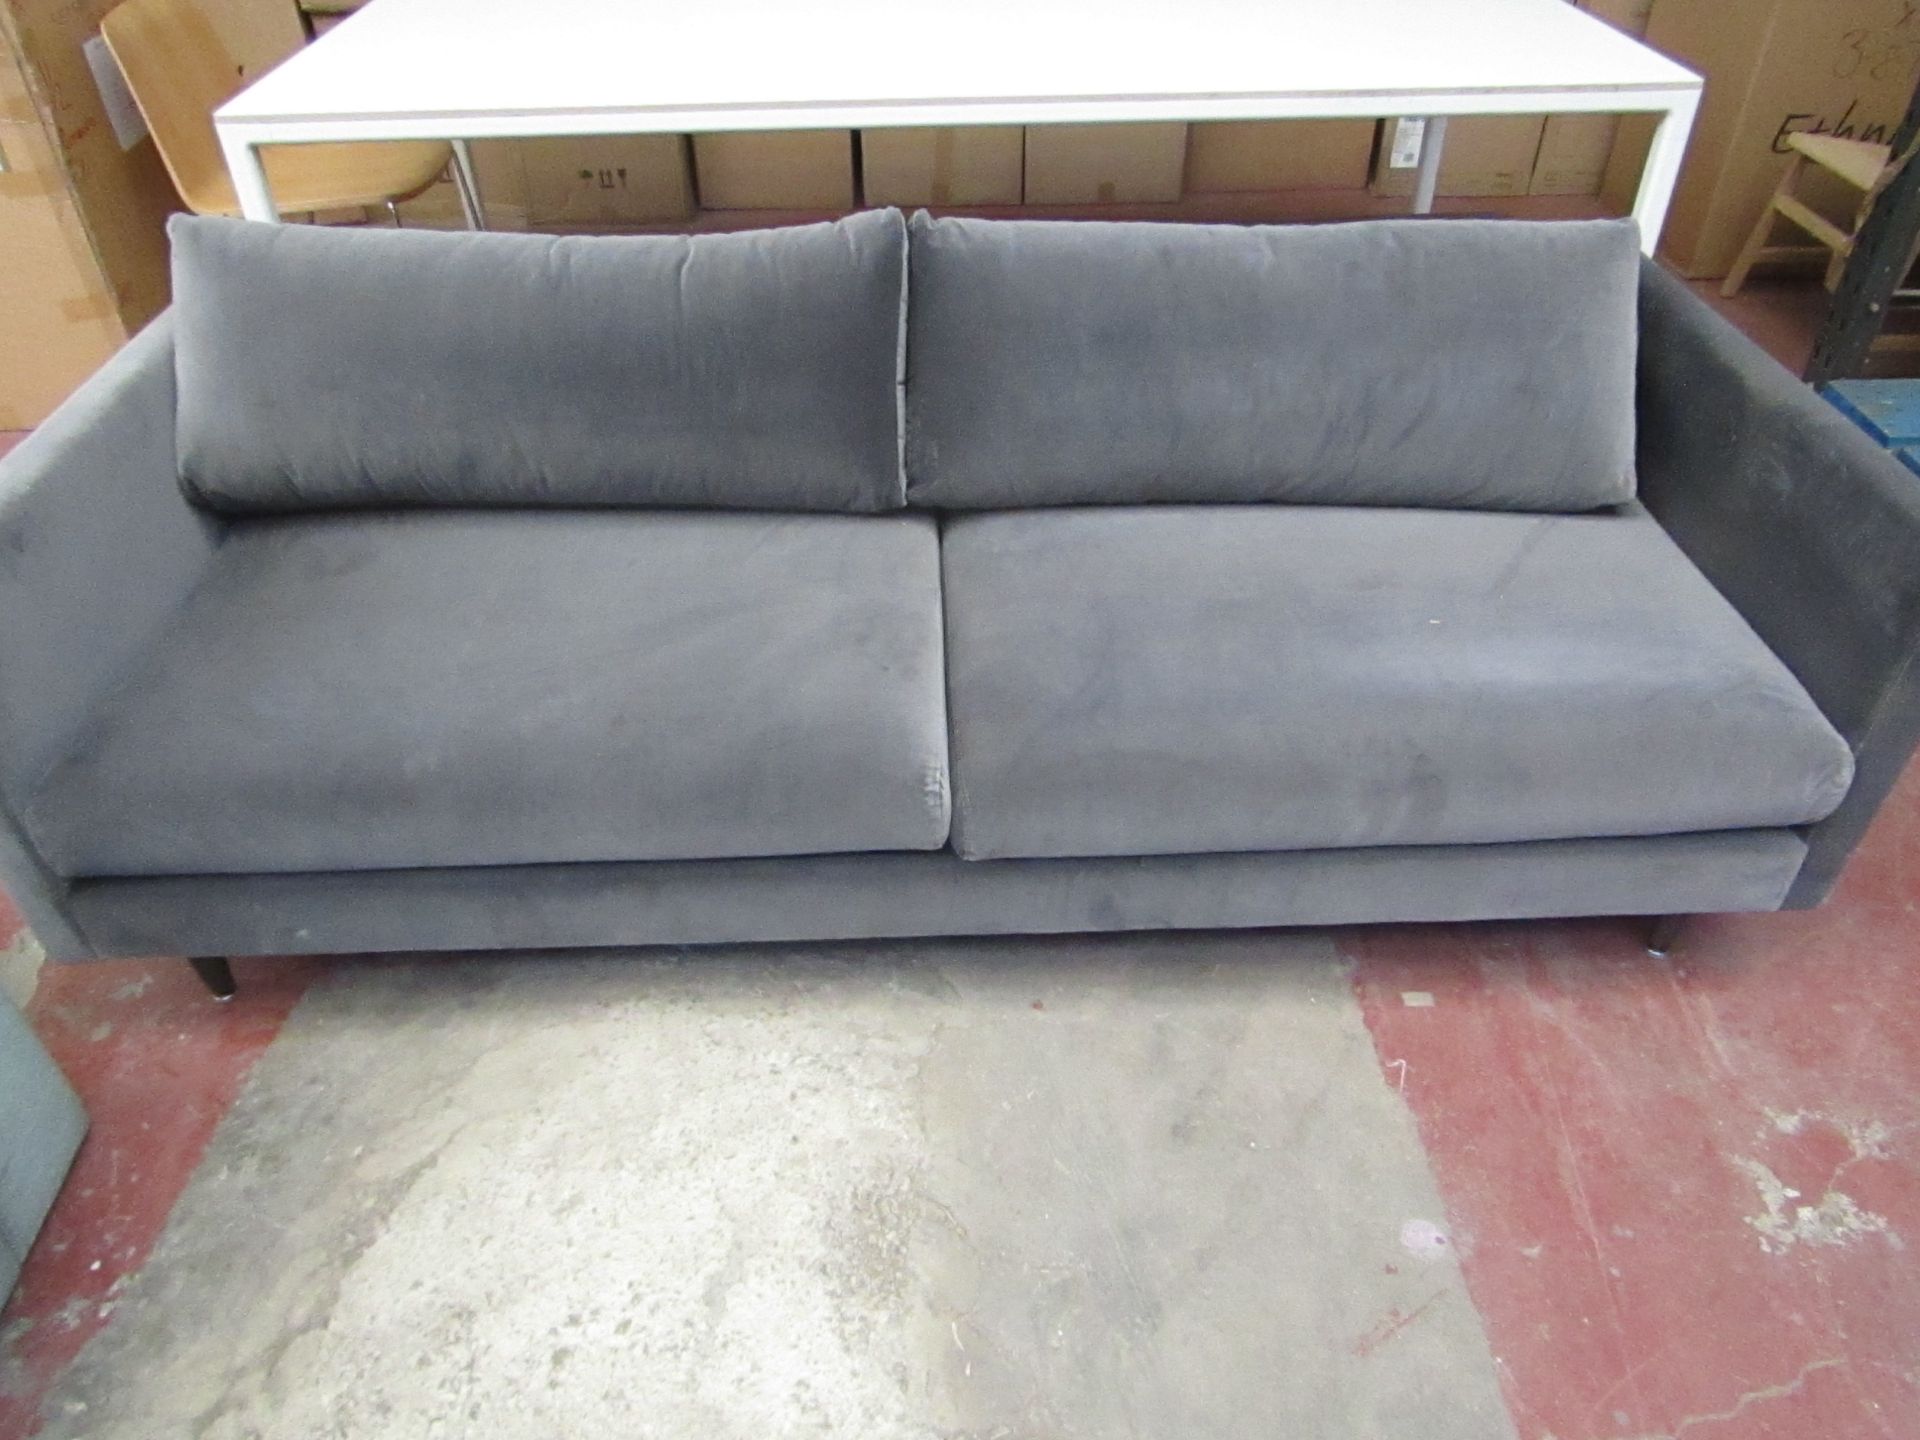 1X | SWOON GREY THREE SEATER SOFA | APPEARS TO HAVE NO MAJOR DAMAGE AND MAY CONTAIN A FEW MARKS |